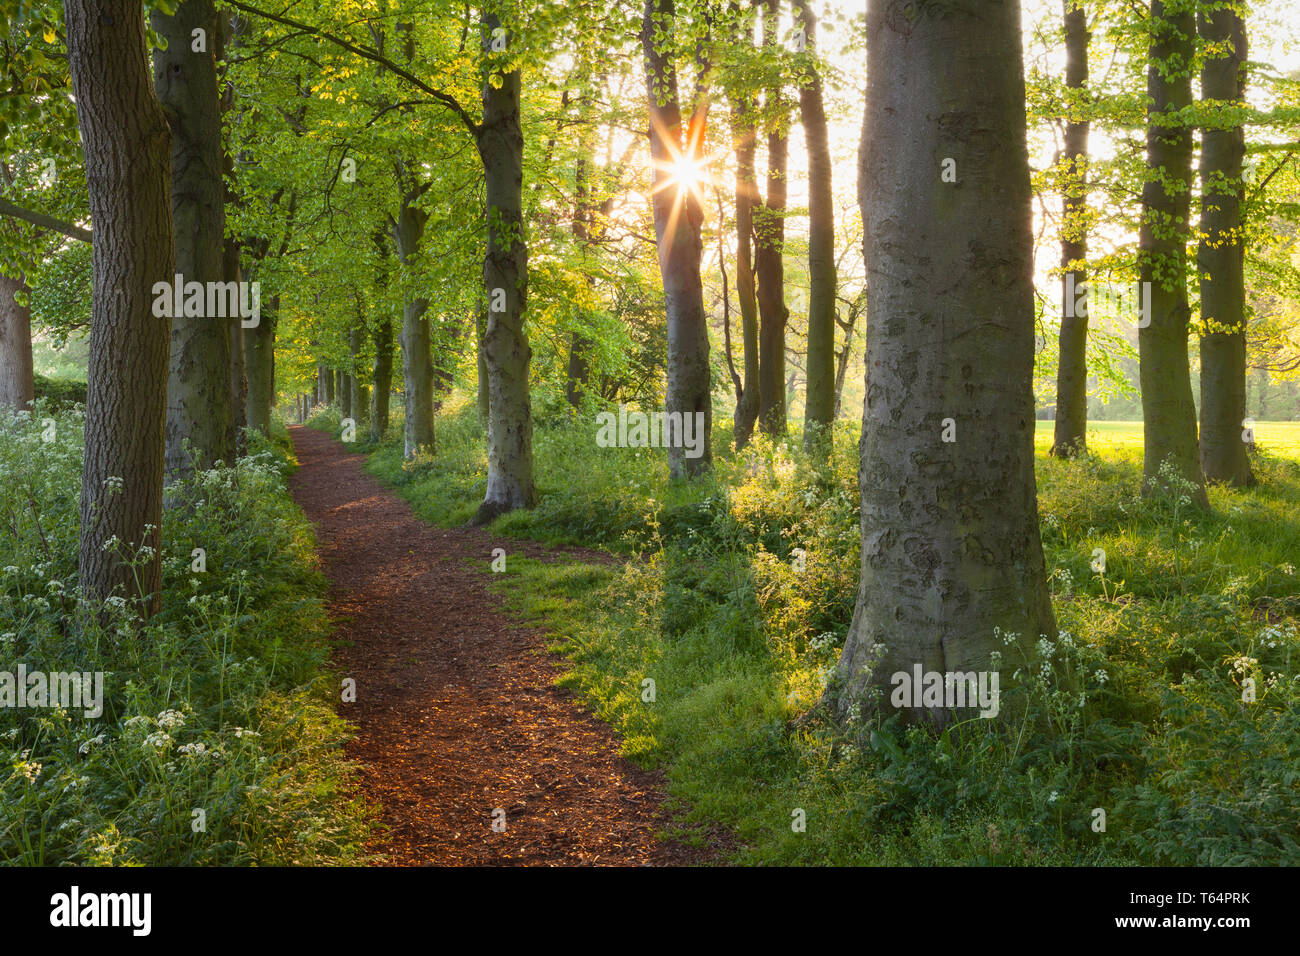 Barton-upon-Humber, North Lincolnshire. 29th Apr 2019. UK Weather: Evening light through Beech Trees in Baysgarth Park in Spring. Barton-upon-Humber, North Lincolnshire, UK. 29th April 2019. Credit: LEE BEEL/Alamy Live News Stock Photo